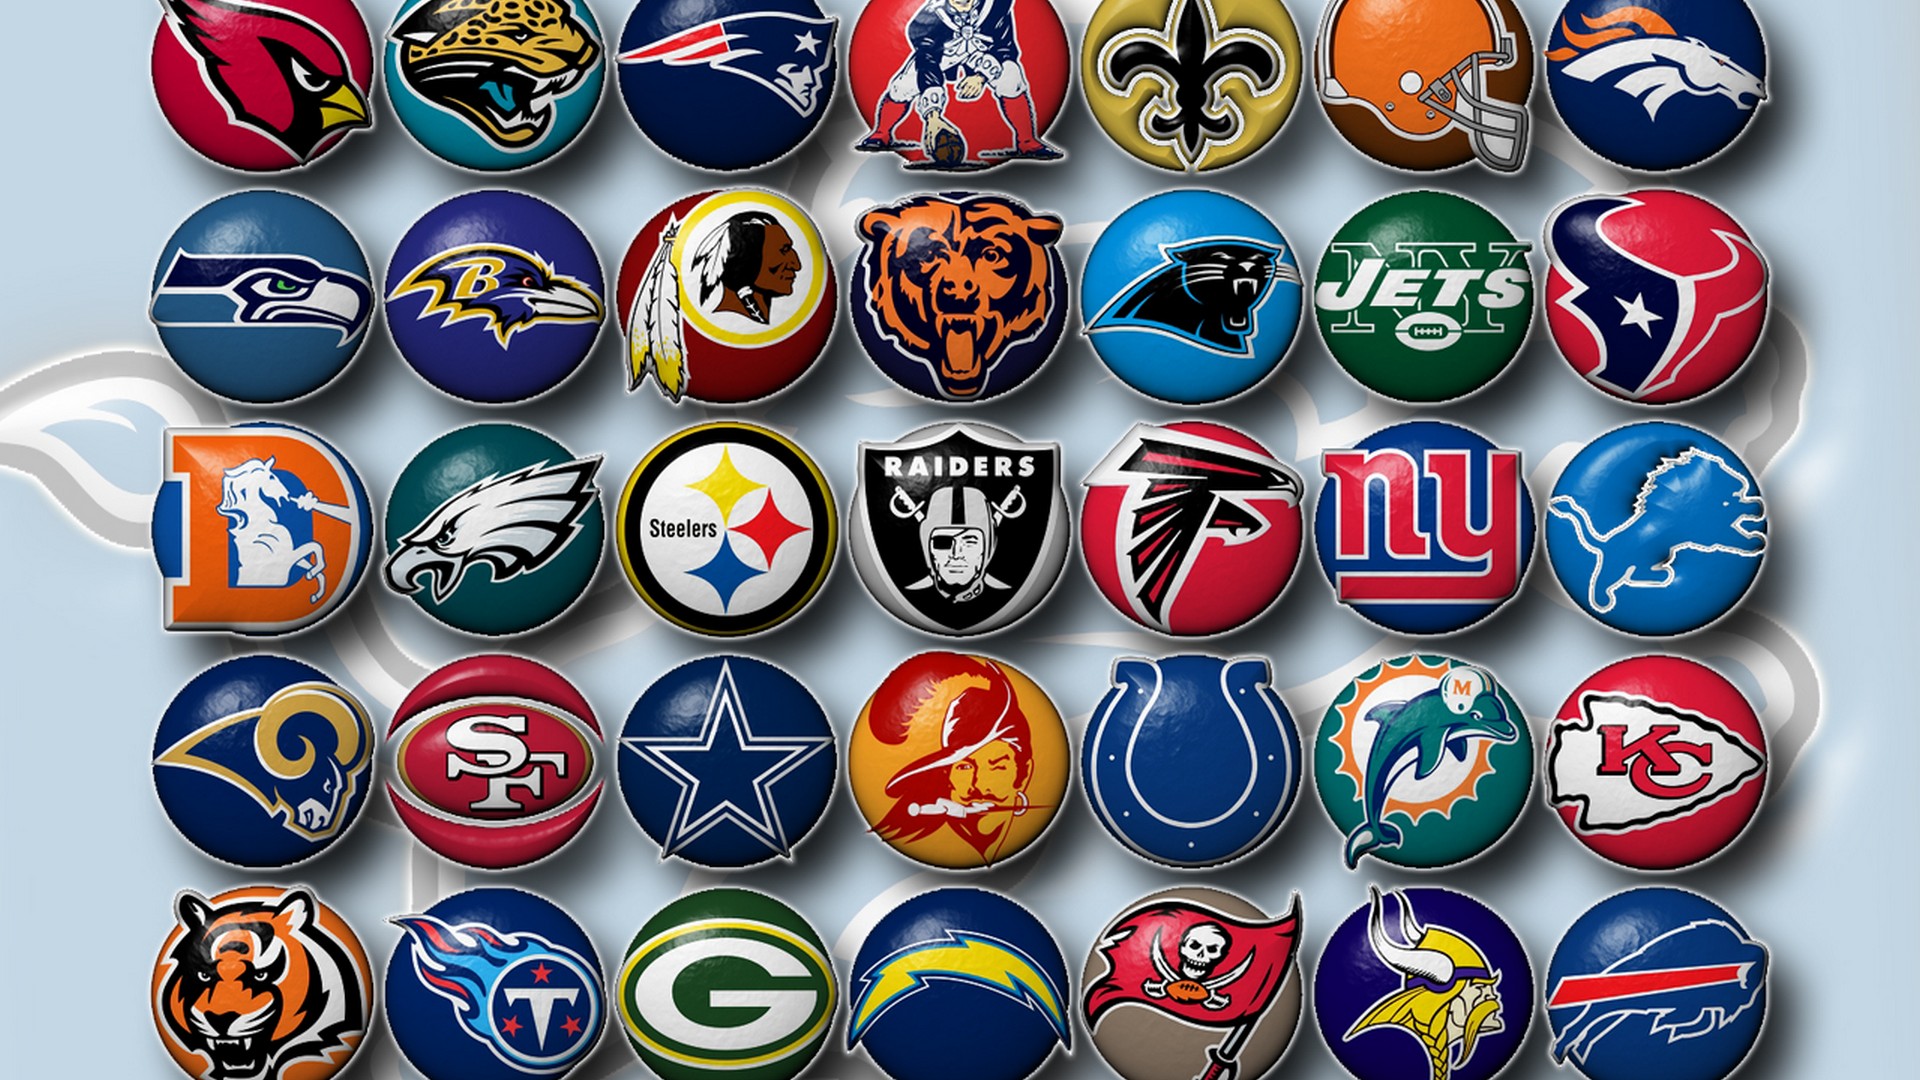 NFL For PC Wallpaper With Resolution 1920X1080